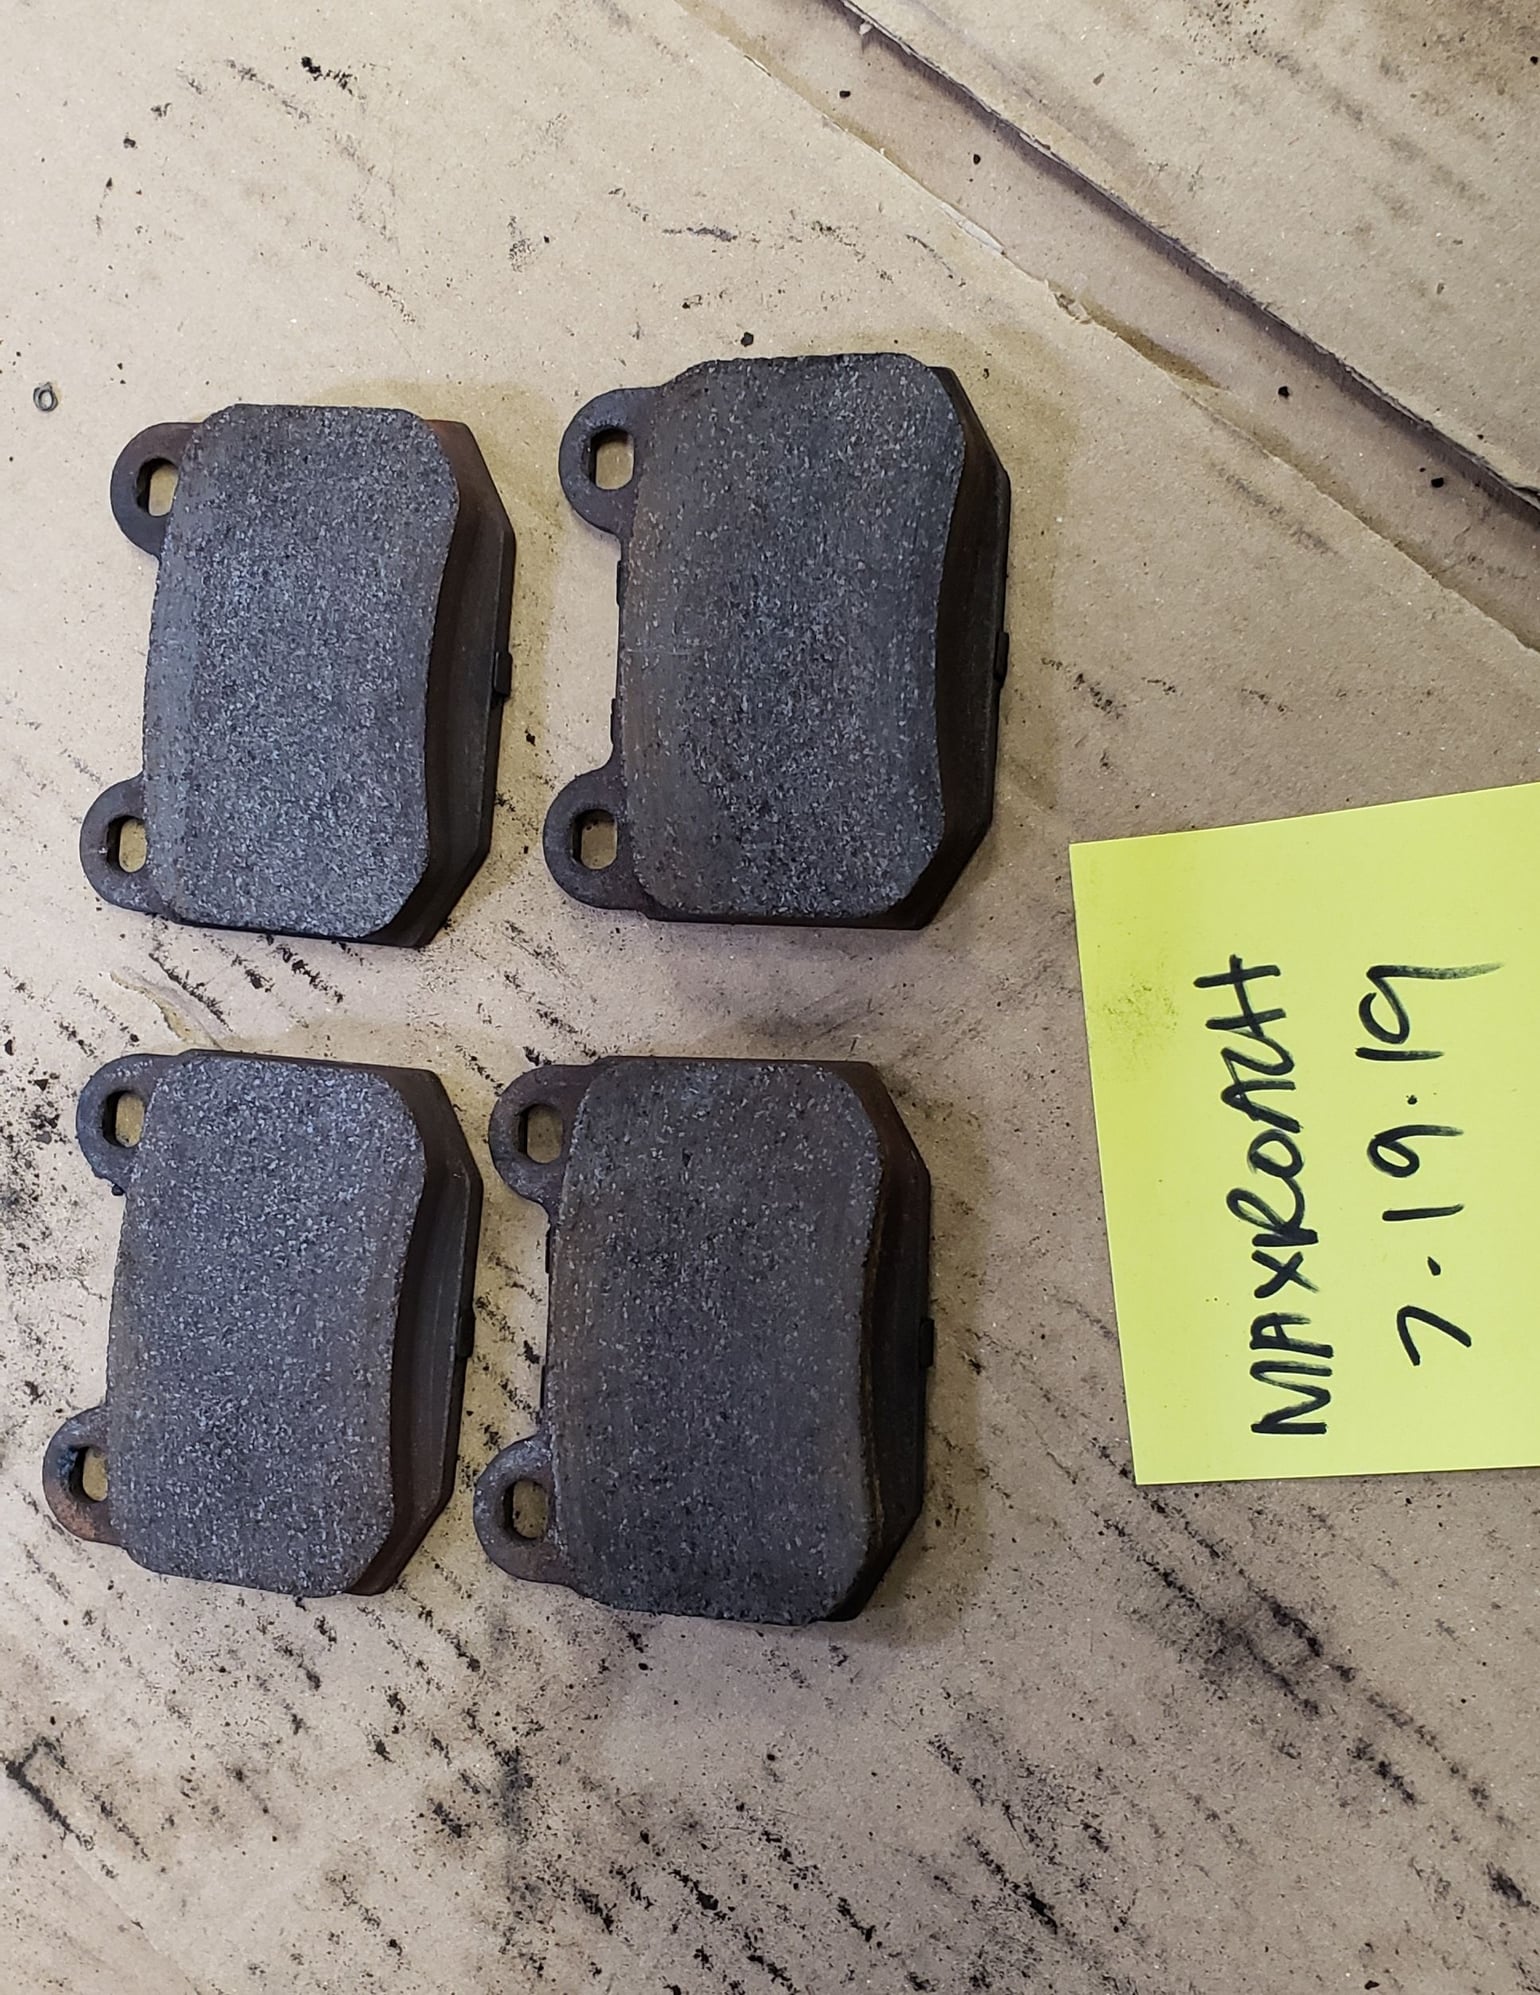 Brakes - PFC Race Pads 01 compound - Used - 2005 to 2007 Mitsubishi Lancer Evolution - Simi Valley, CA 93065, United States